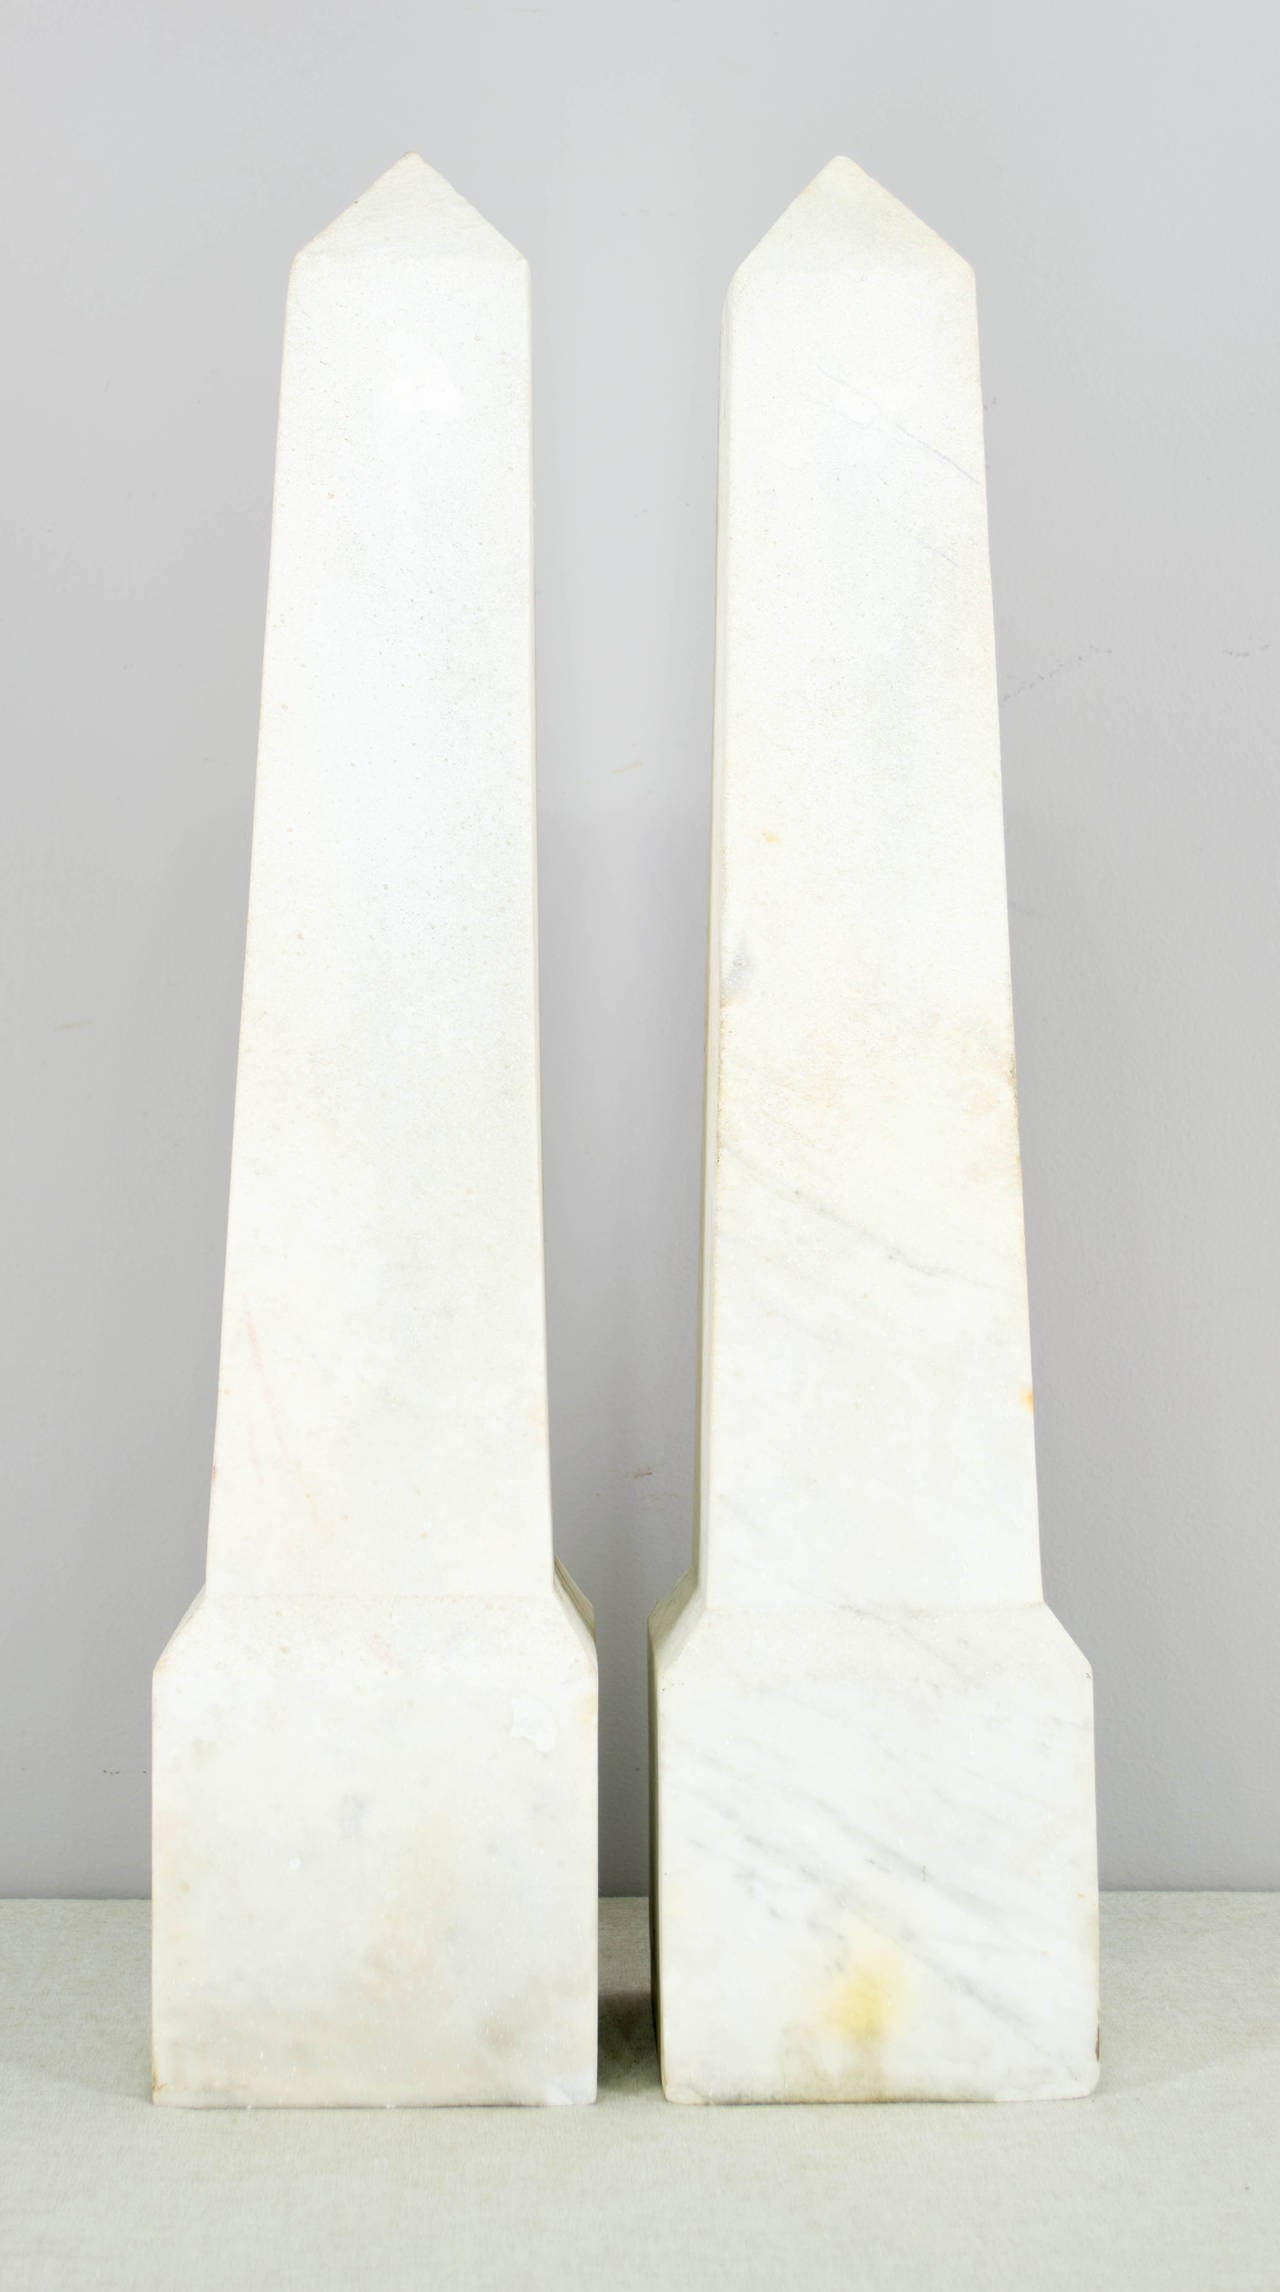 Pair of French marble obélisques. Very white color with a some faint grey veining especially toward the bottom. Weight: 42 lbs. each. As always, more photos available upon request. We have a large selection of French antiques. Please visit our web